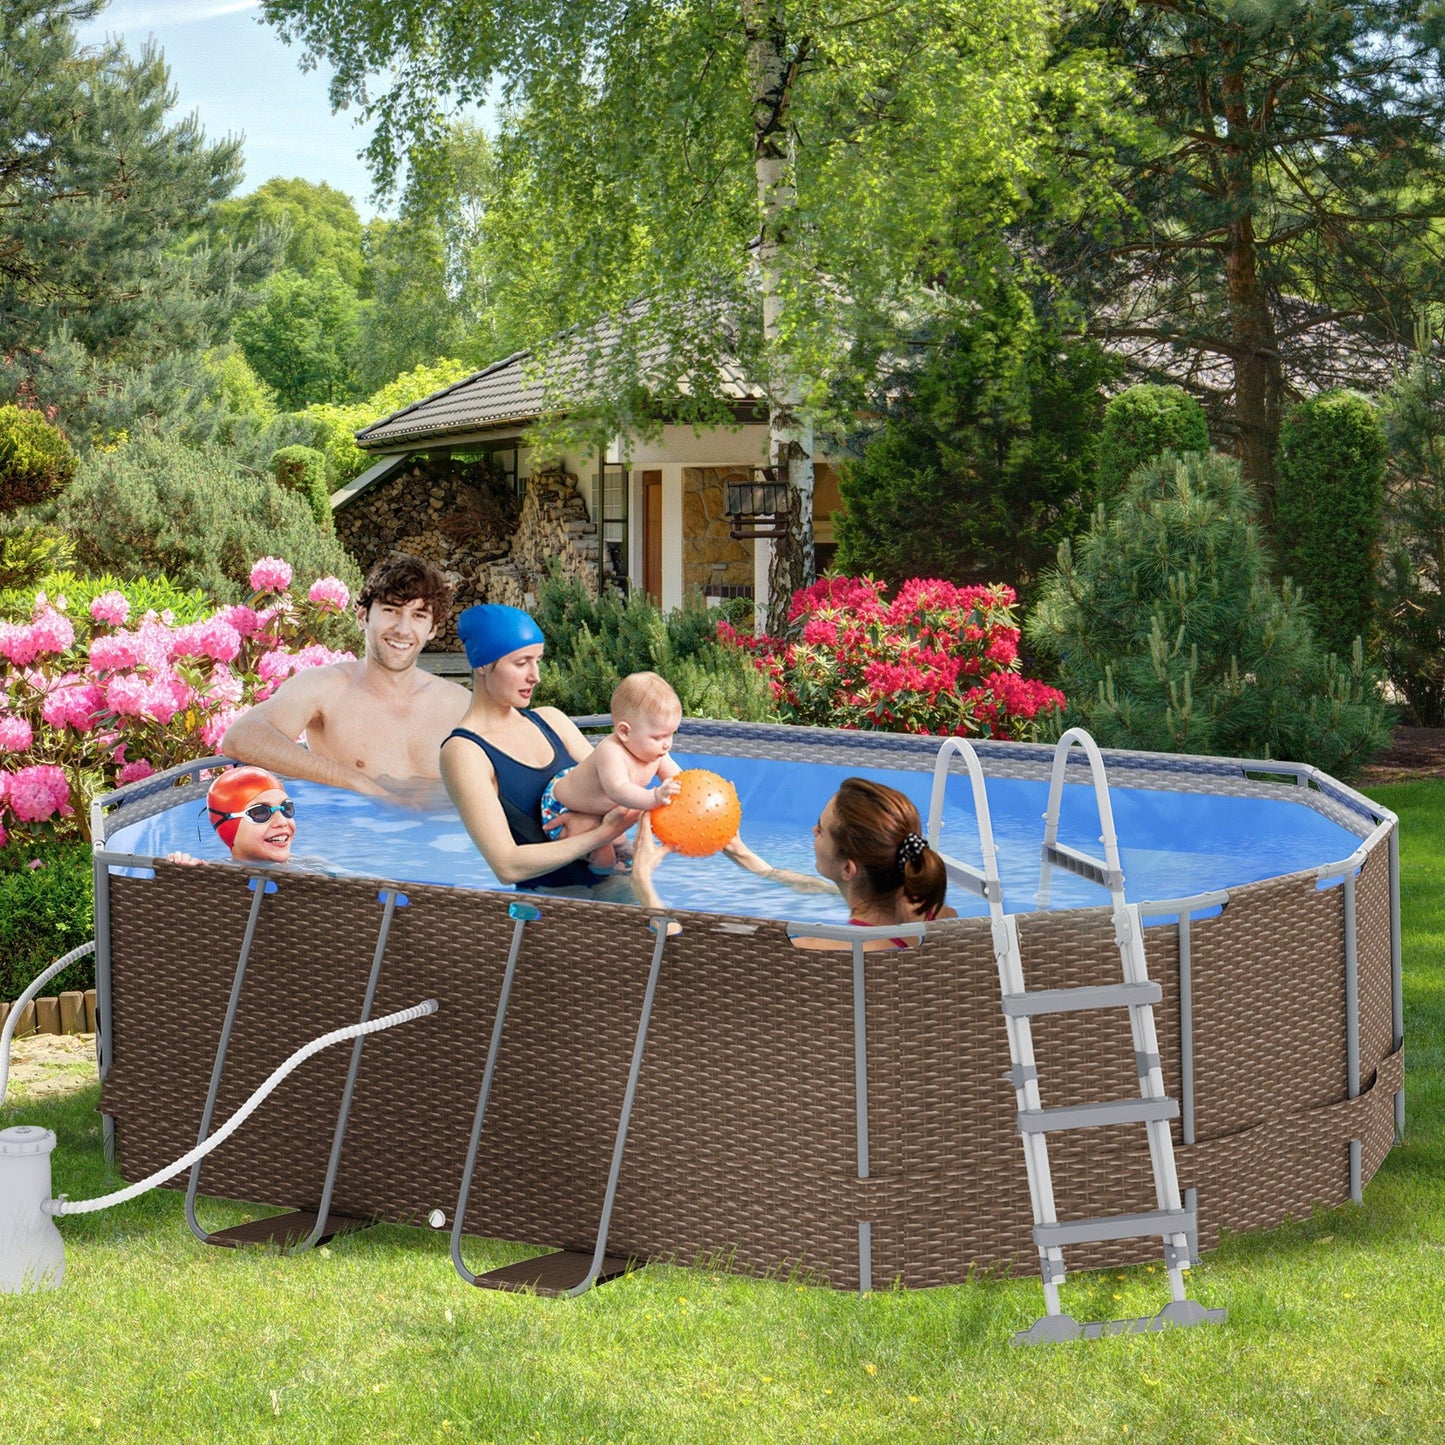 Miscellaneous-14' x 10' x 3' Above Ground Swimming Pool, Non-Inflatable Rectangular Steel Frame Pool with Filter Pump, Safety Ladder for 1-6 People, Brown - Outdoor Style Company